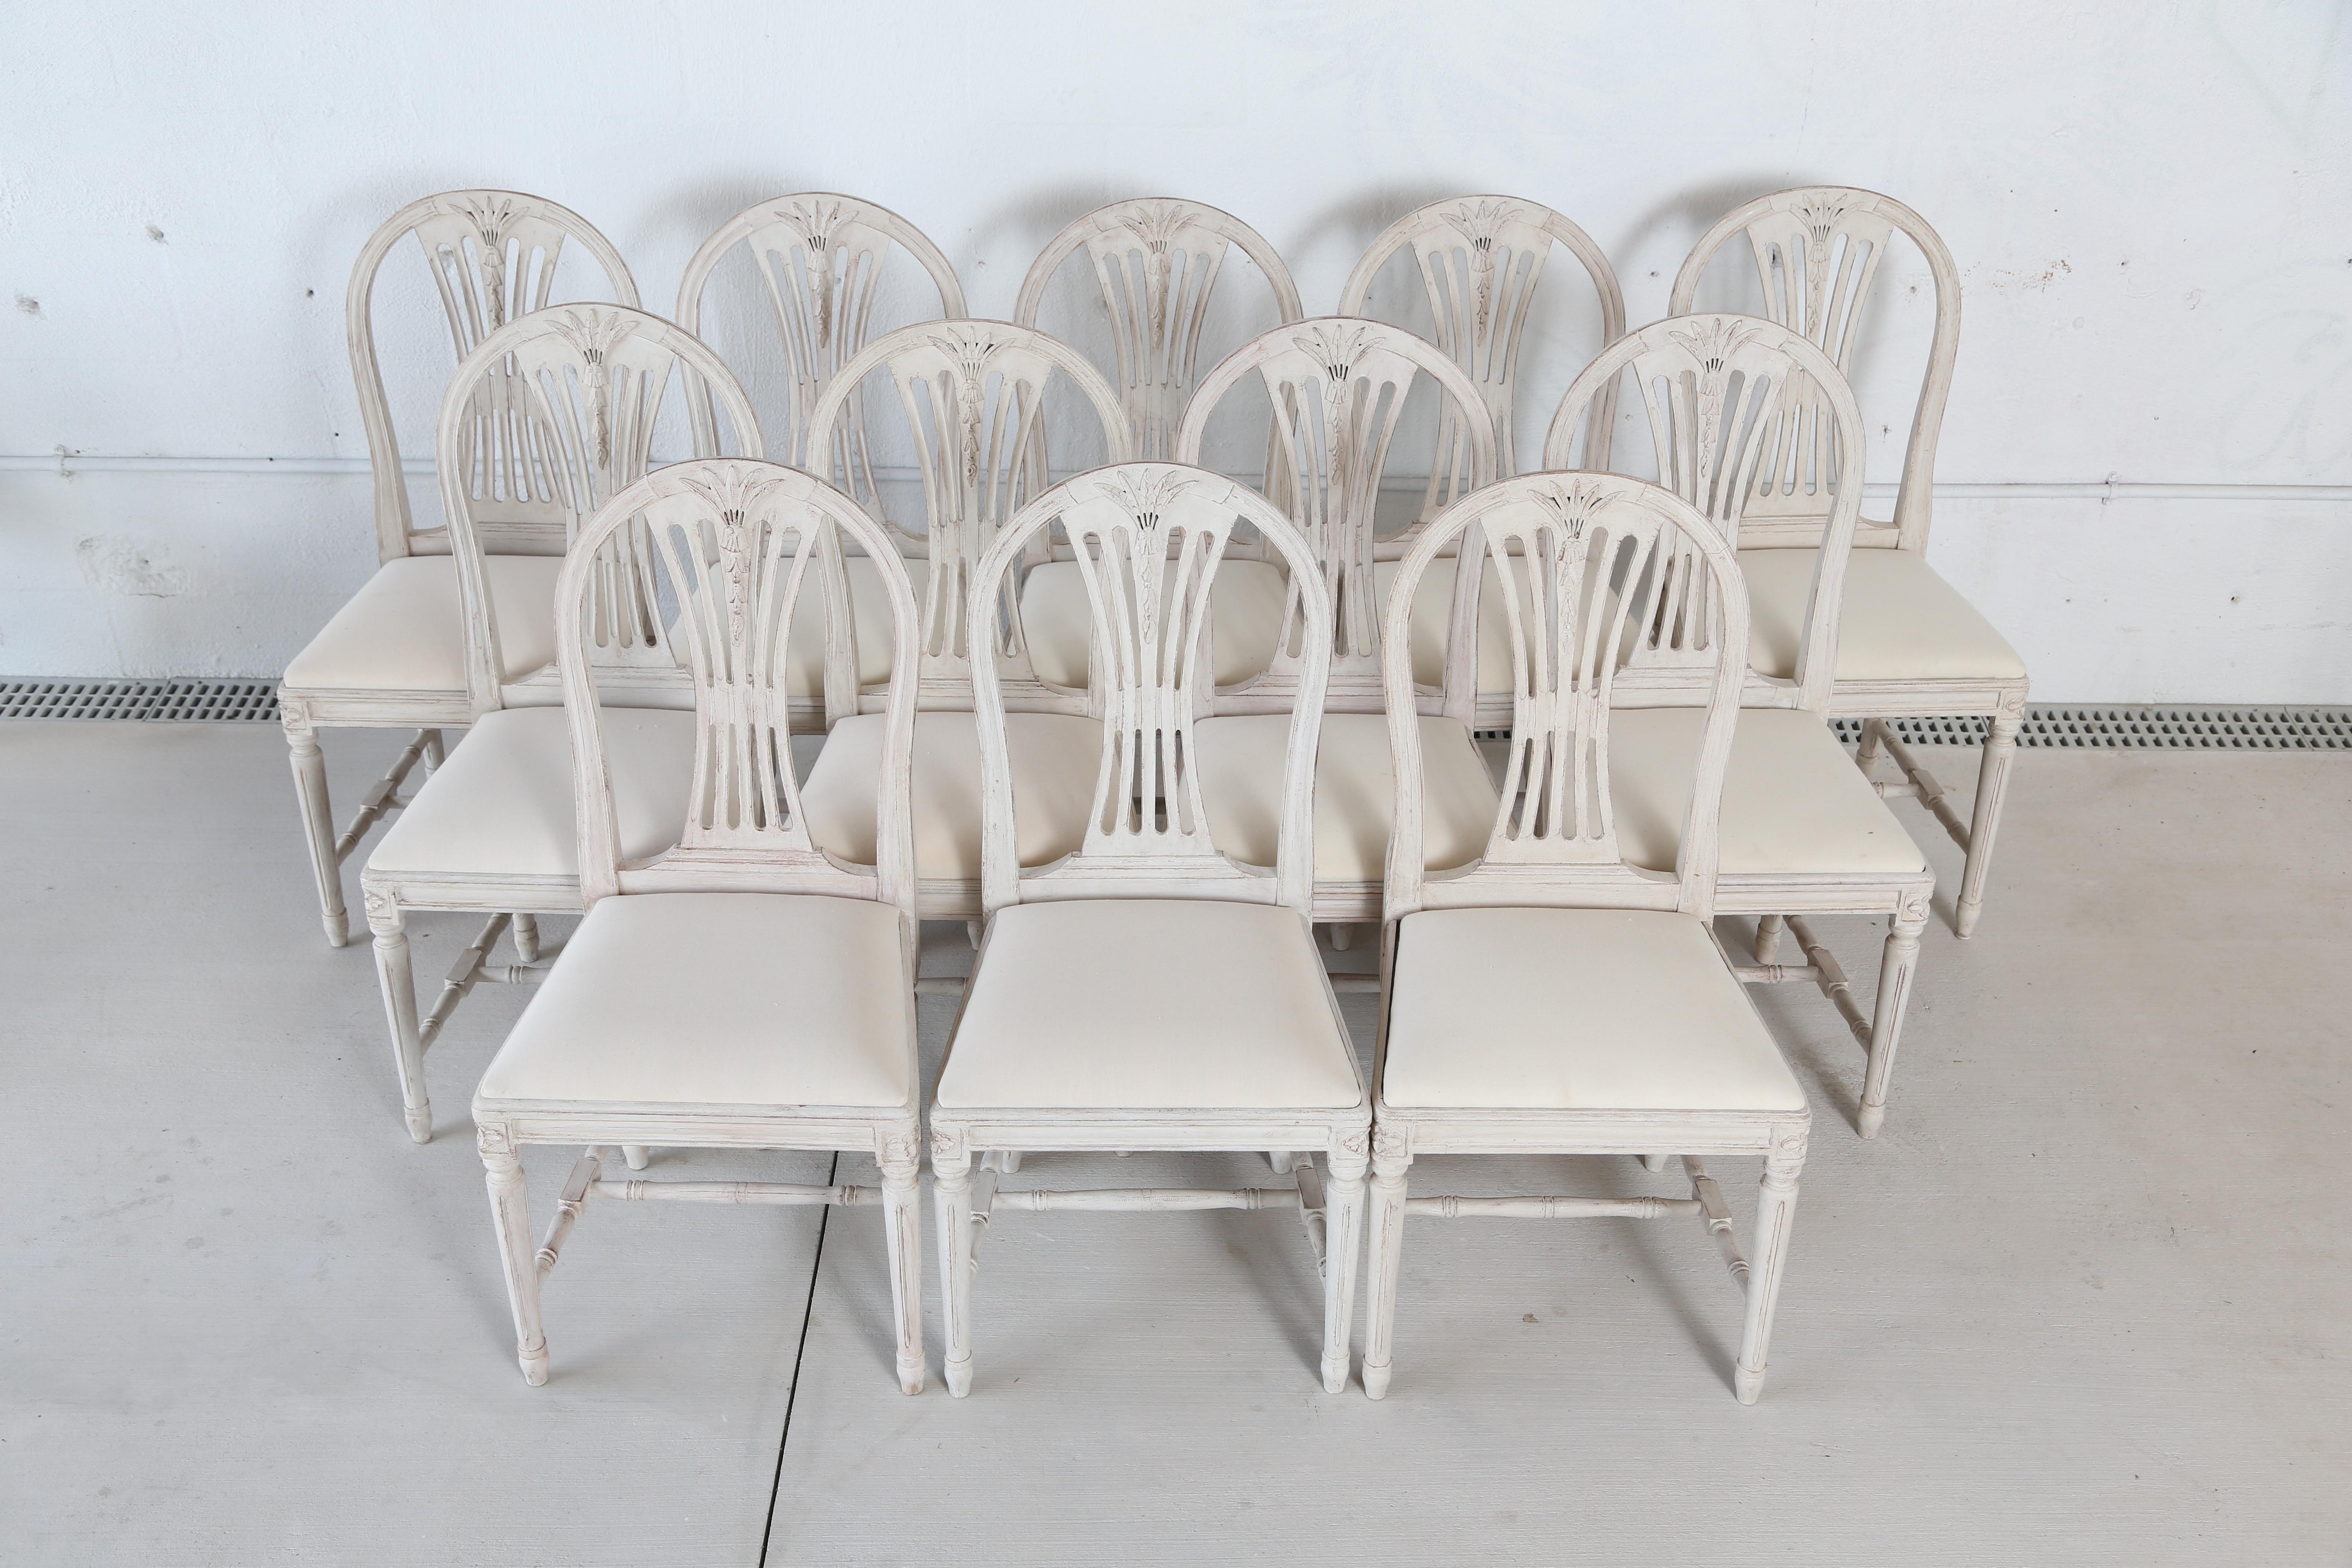 Swedish Set of 12 Antique Painted Gustavian Style Dining Chairs